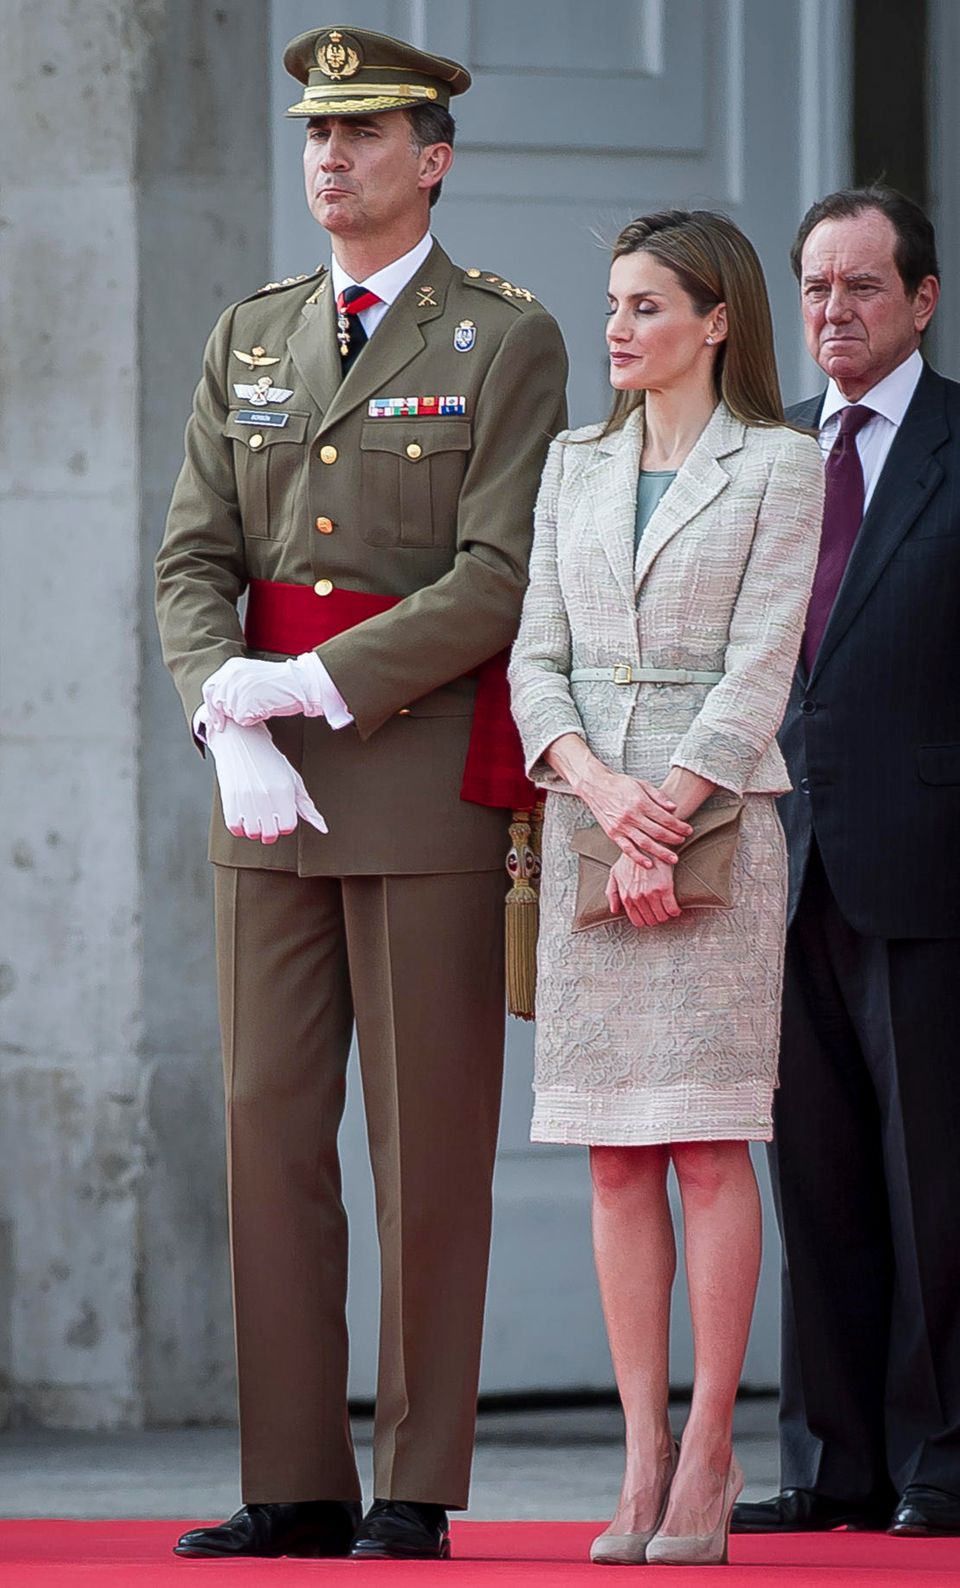 Jaime Alfonsín was King Felipe's shadow for 30 years - until now.